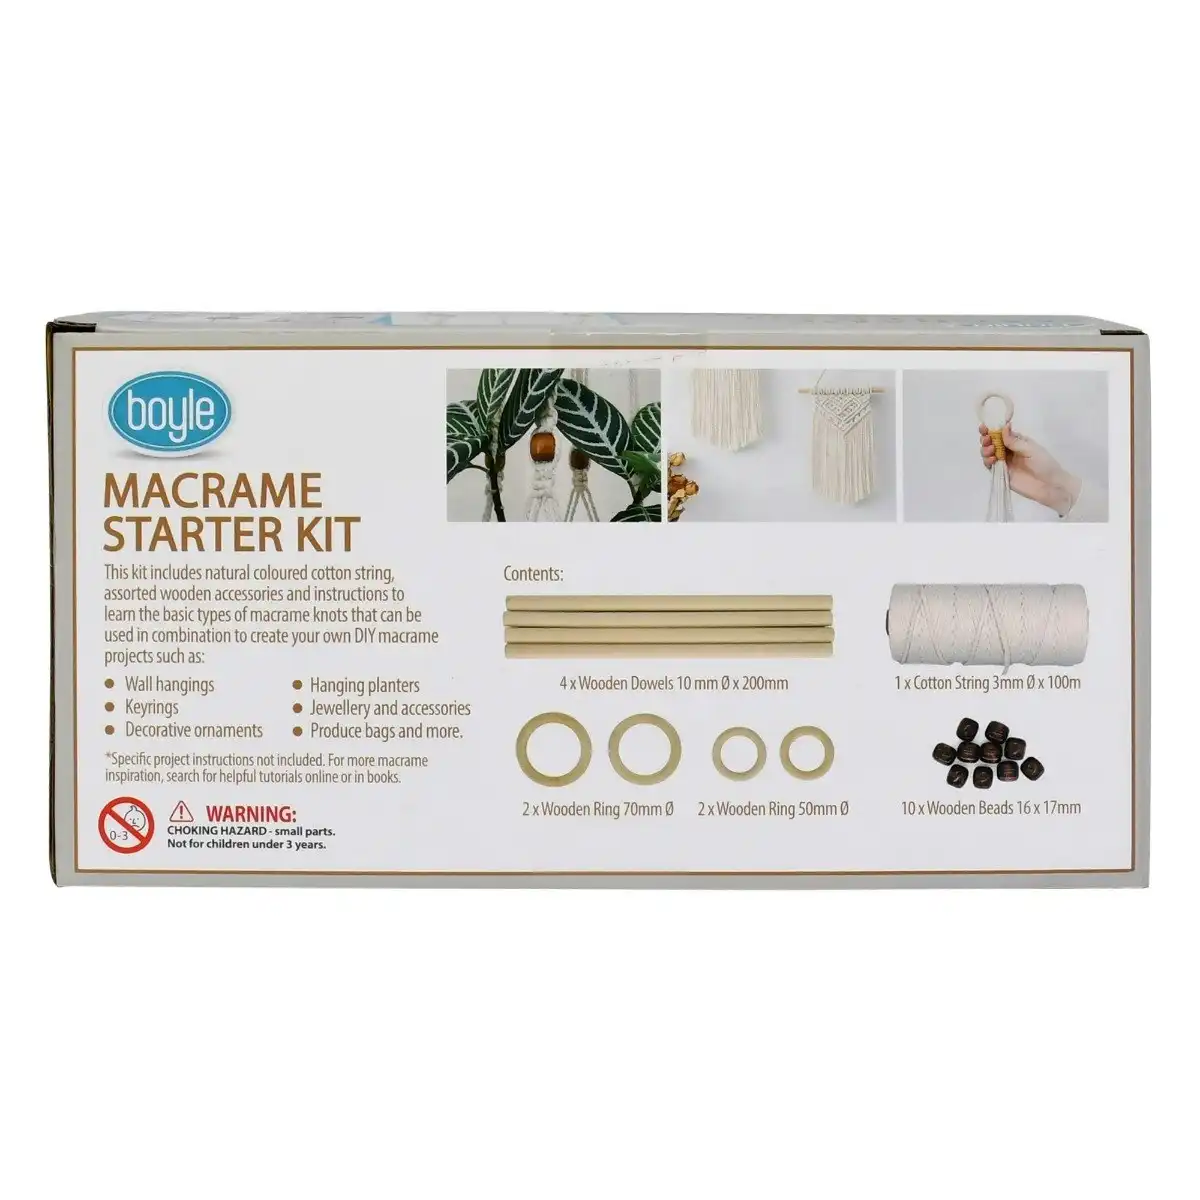 19pc Boyle Macrame Starter Kit DIY Activity Project w/ Wooden Dowels/Rings/Beads